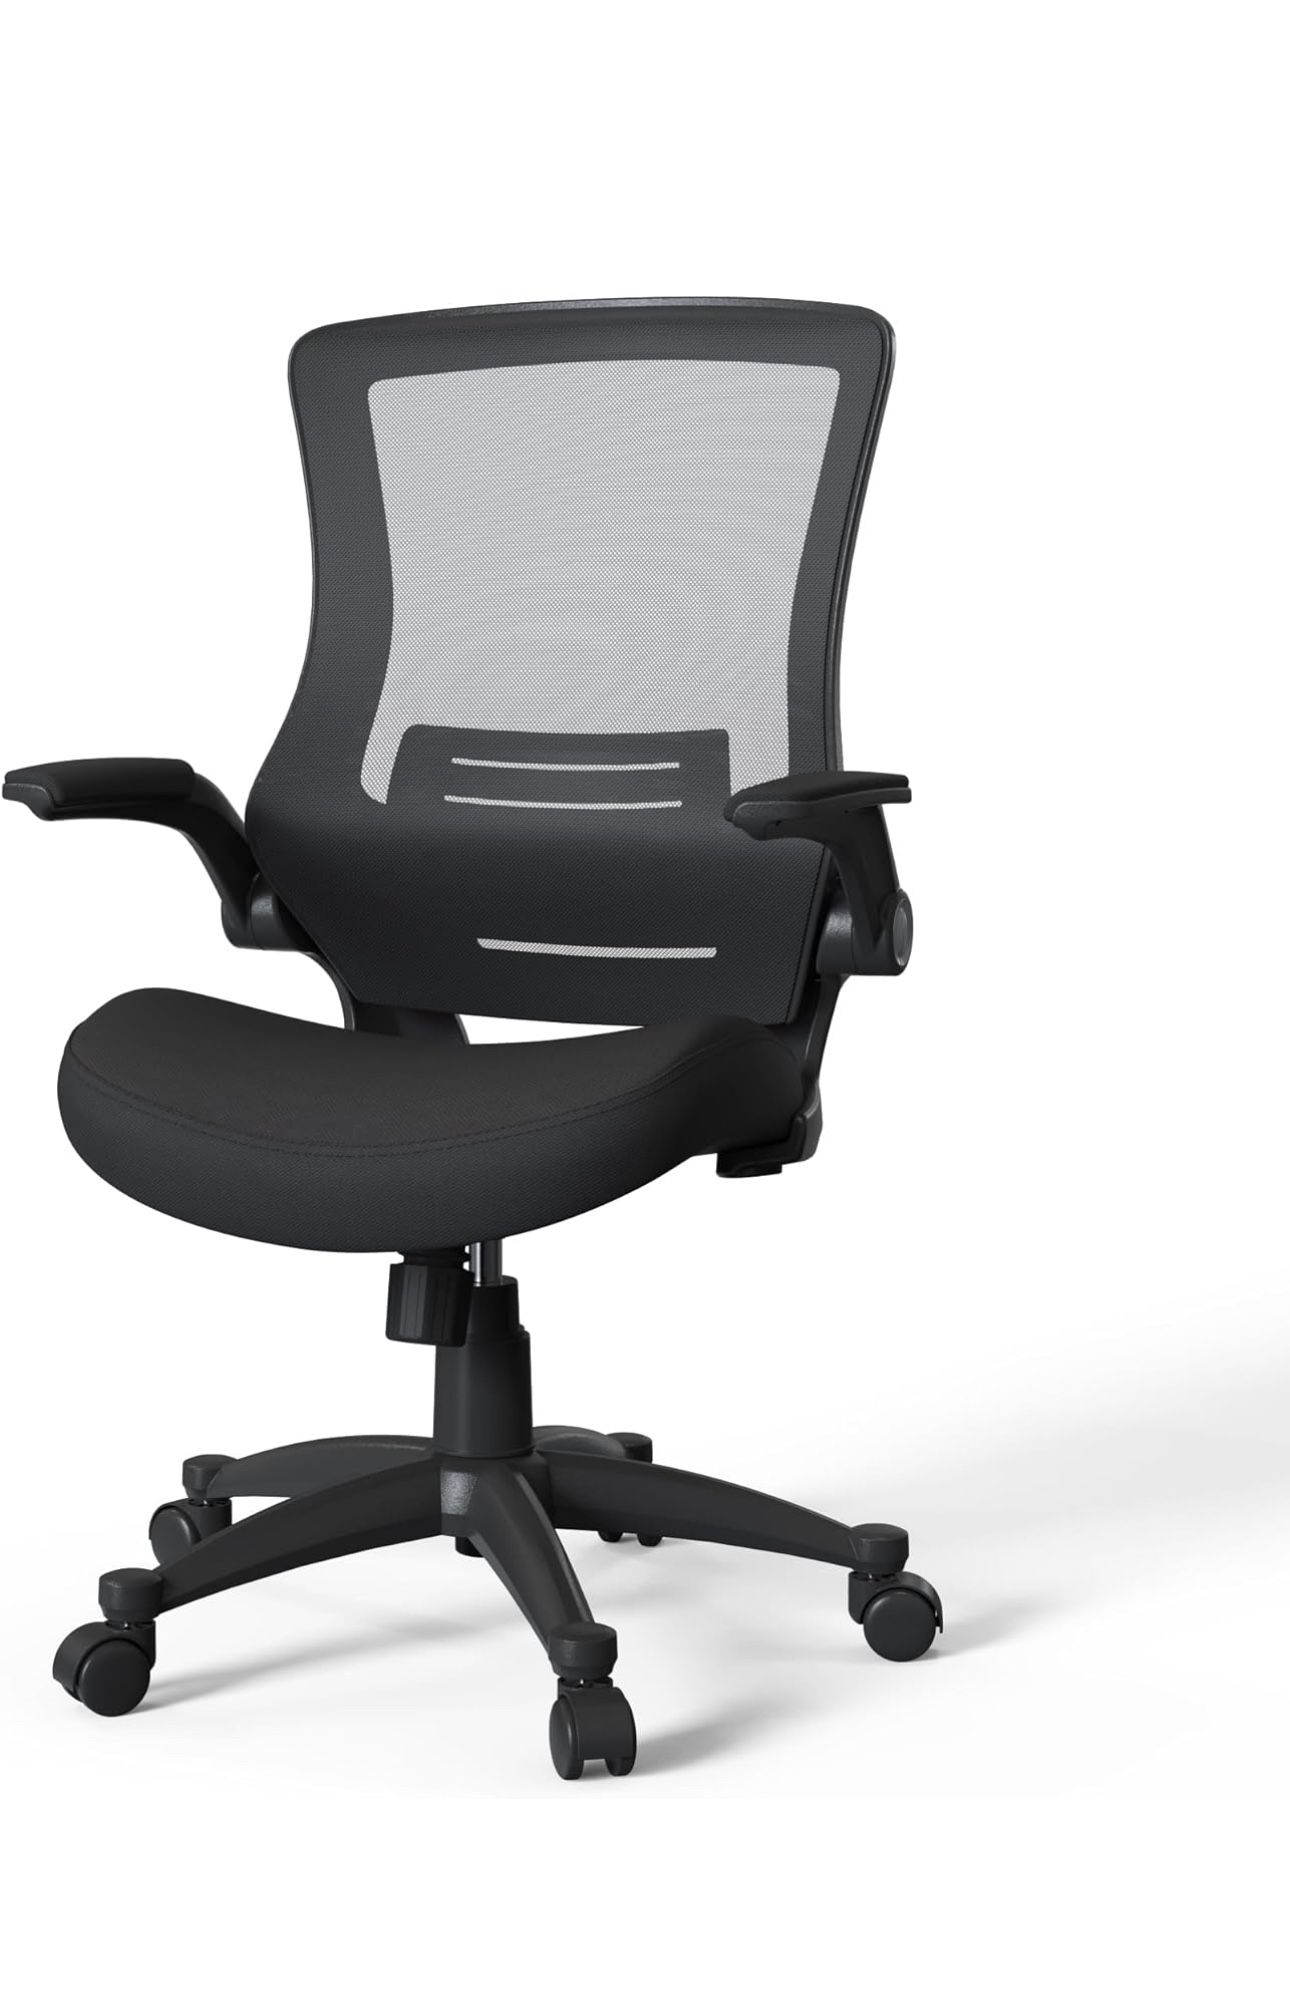 Brand New  Ergonomic Mesh Swivel Home Office Computer Desk Chair Height Adjustable with Flip Up Arms and Lumbar Support, Mid Back, Black